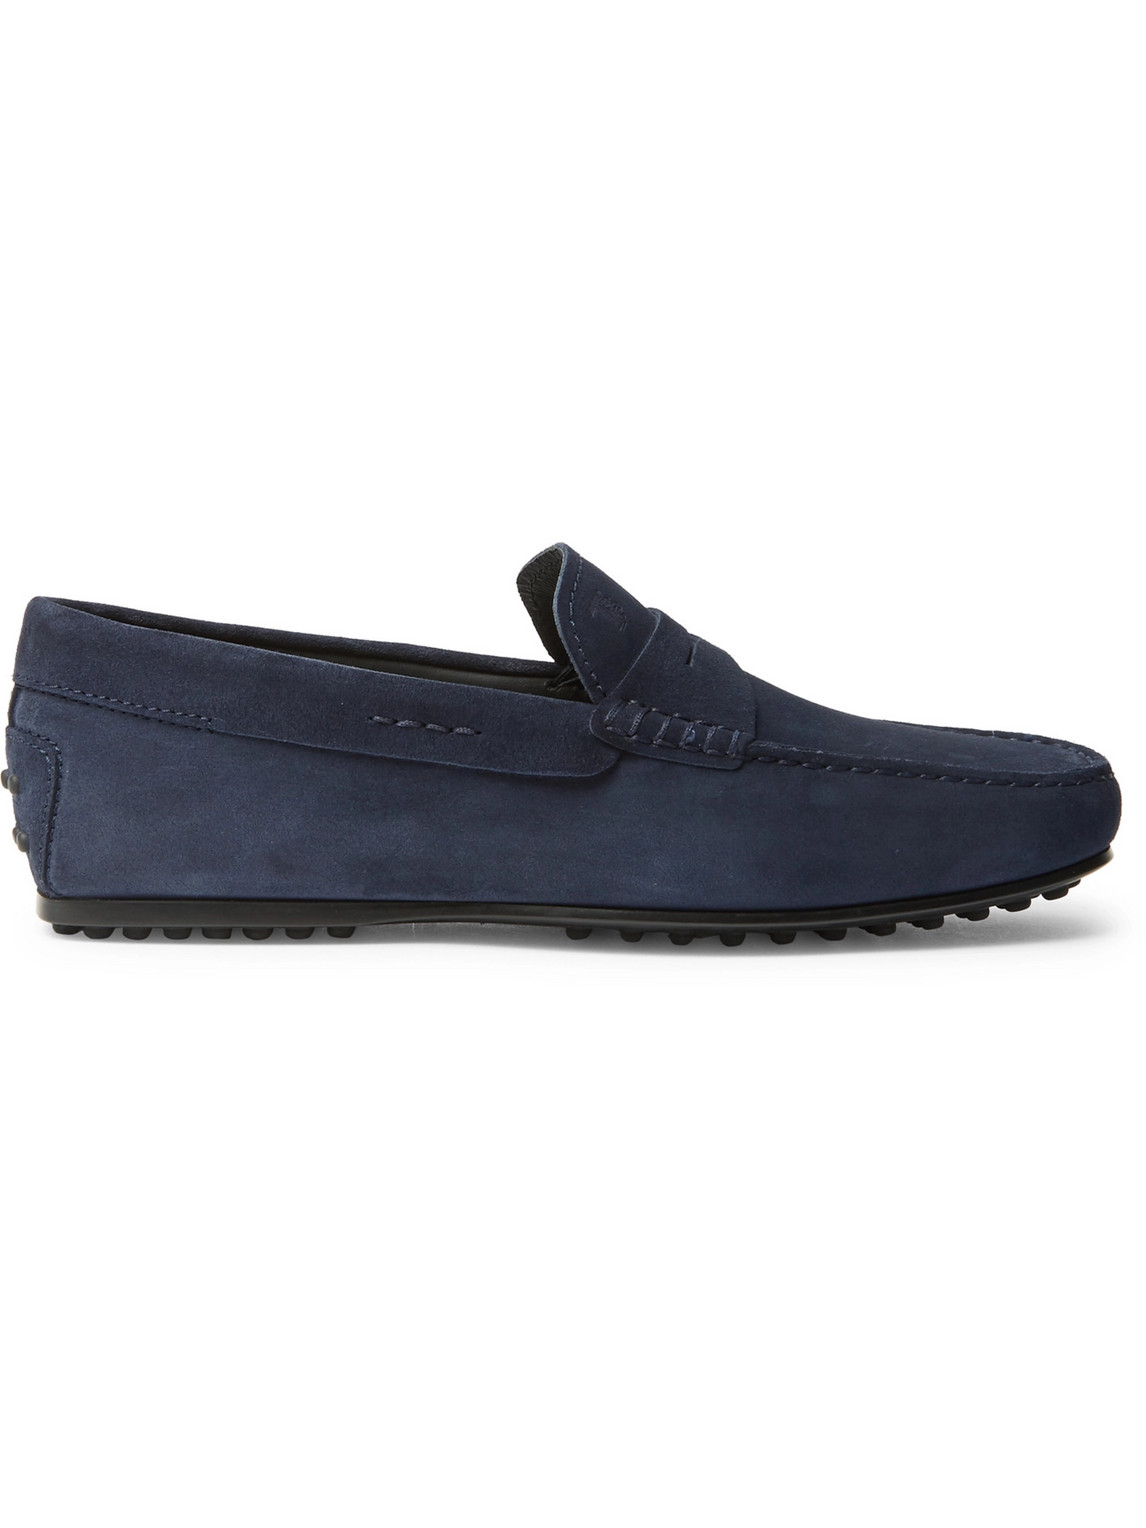 Tod's - Gommino Suede Driving Shoes - Men - Blue - UK 9 von Tod's